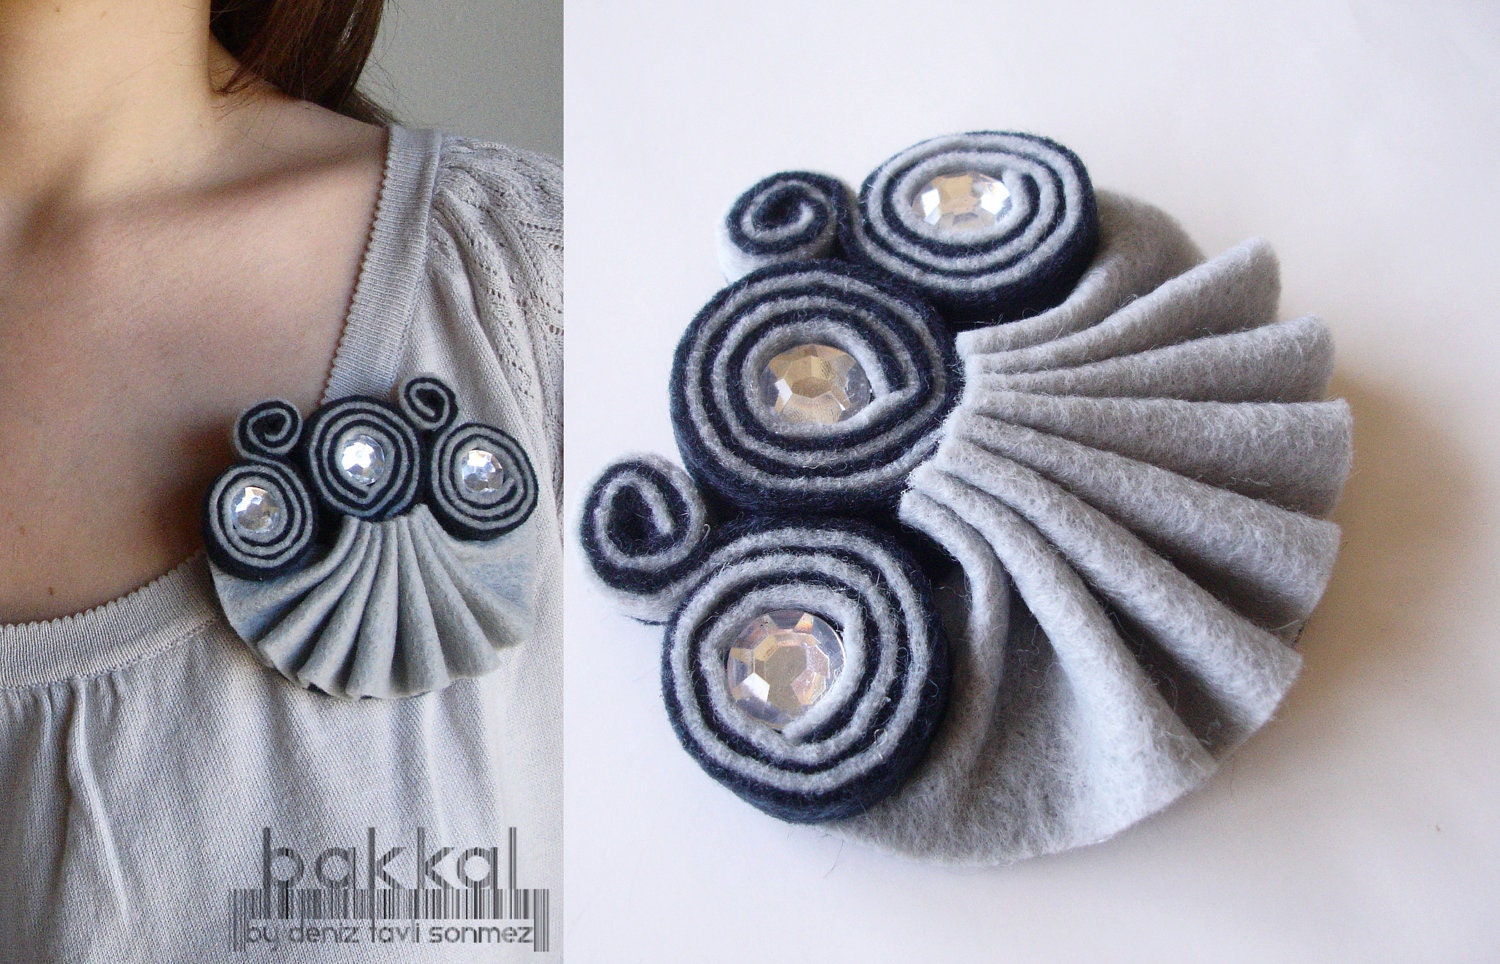 Navy Blue and Gray Felt Brooch with gemstones, Blue Felt Brooch, Felt Brooch, Blue, Rolled Felt, Everyday Jewelry, Charming, Gray Brooch - bakkal